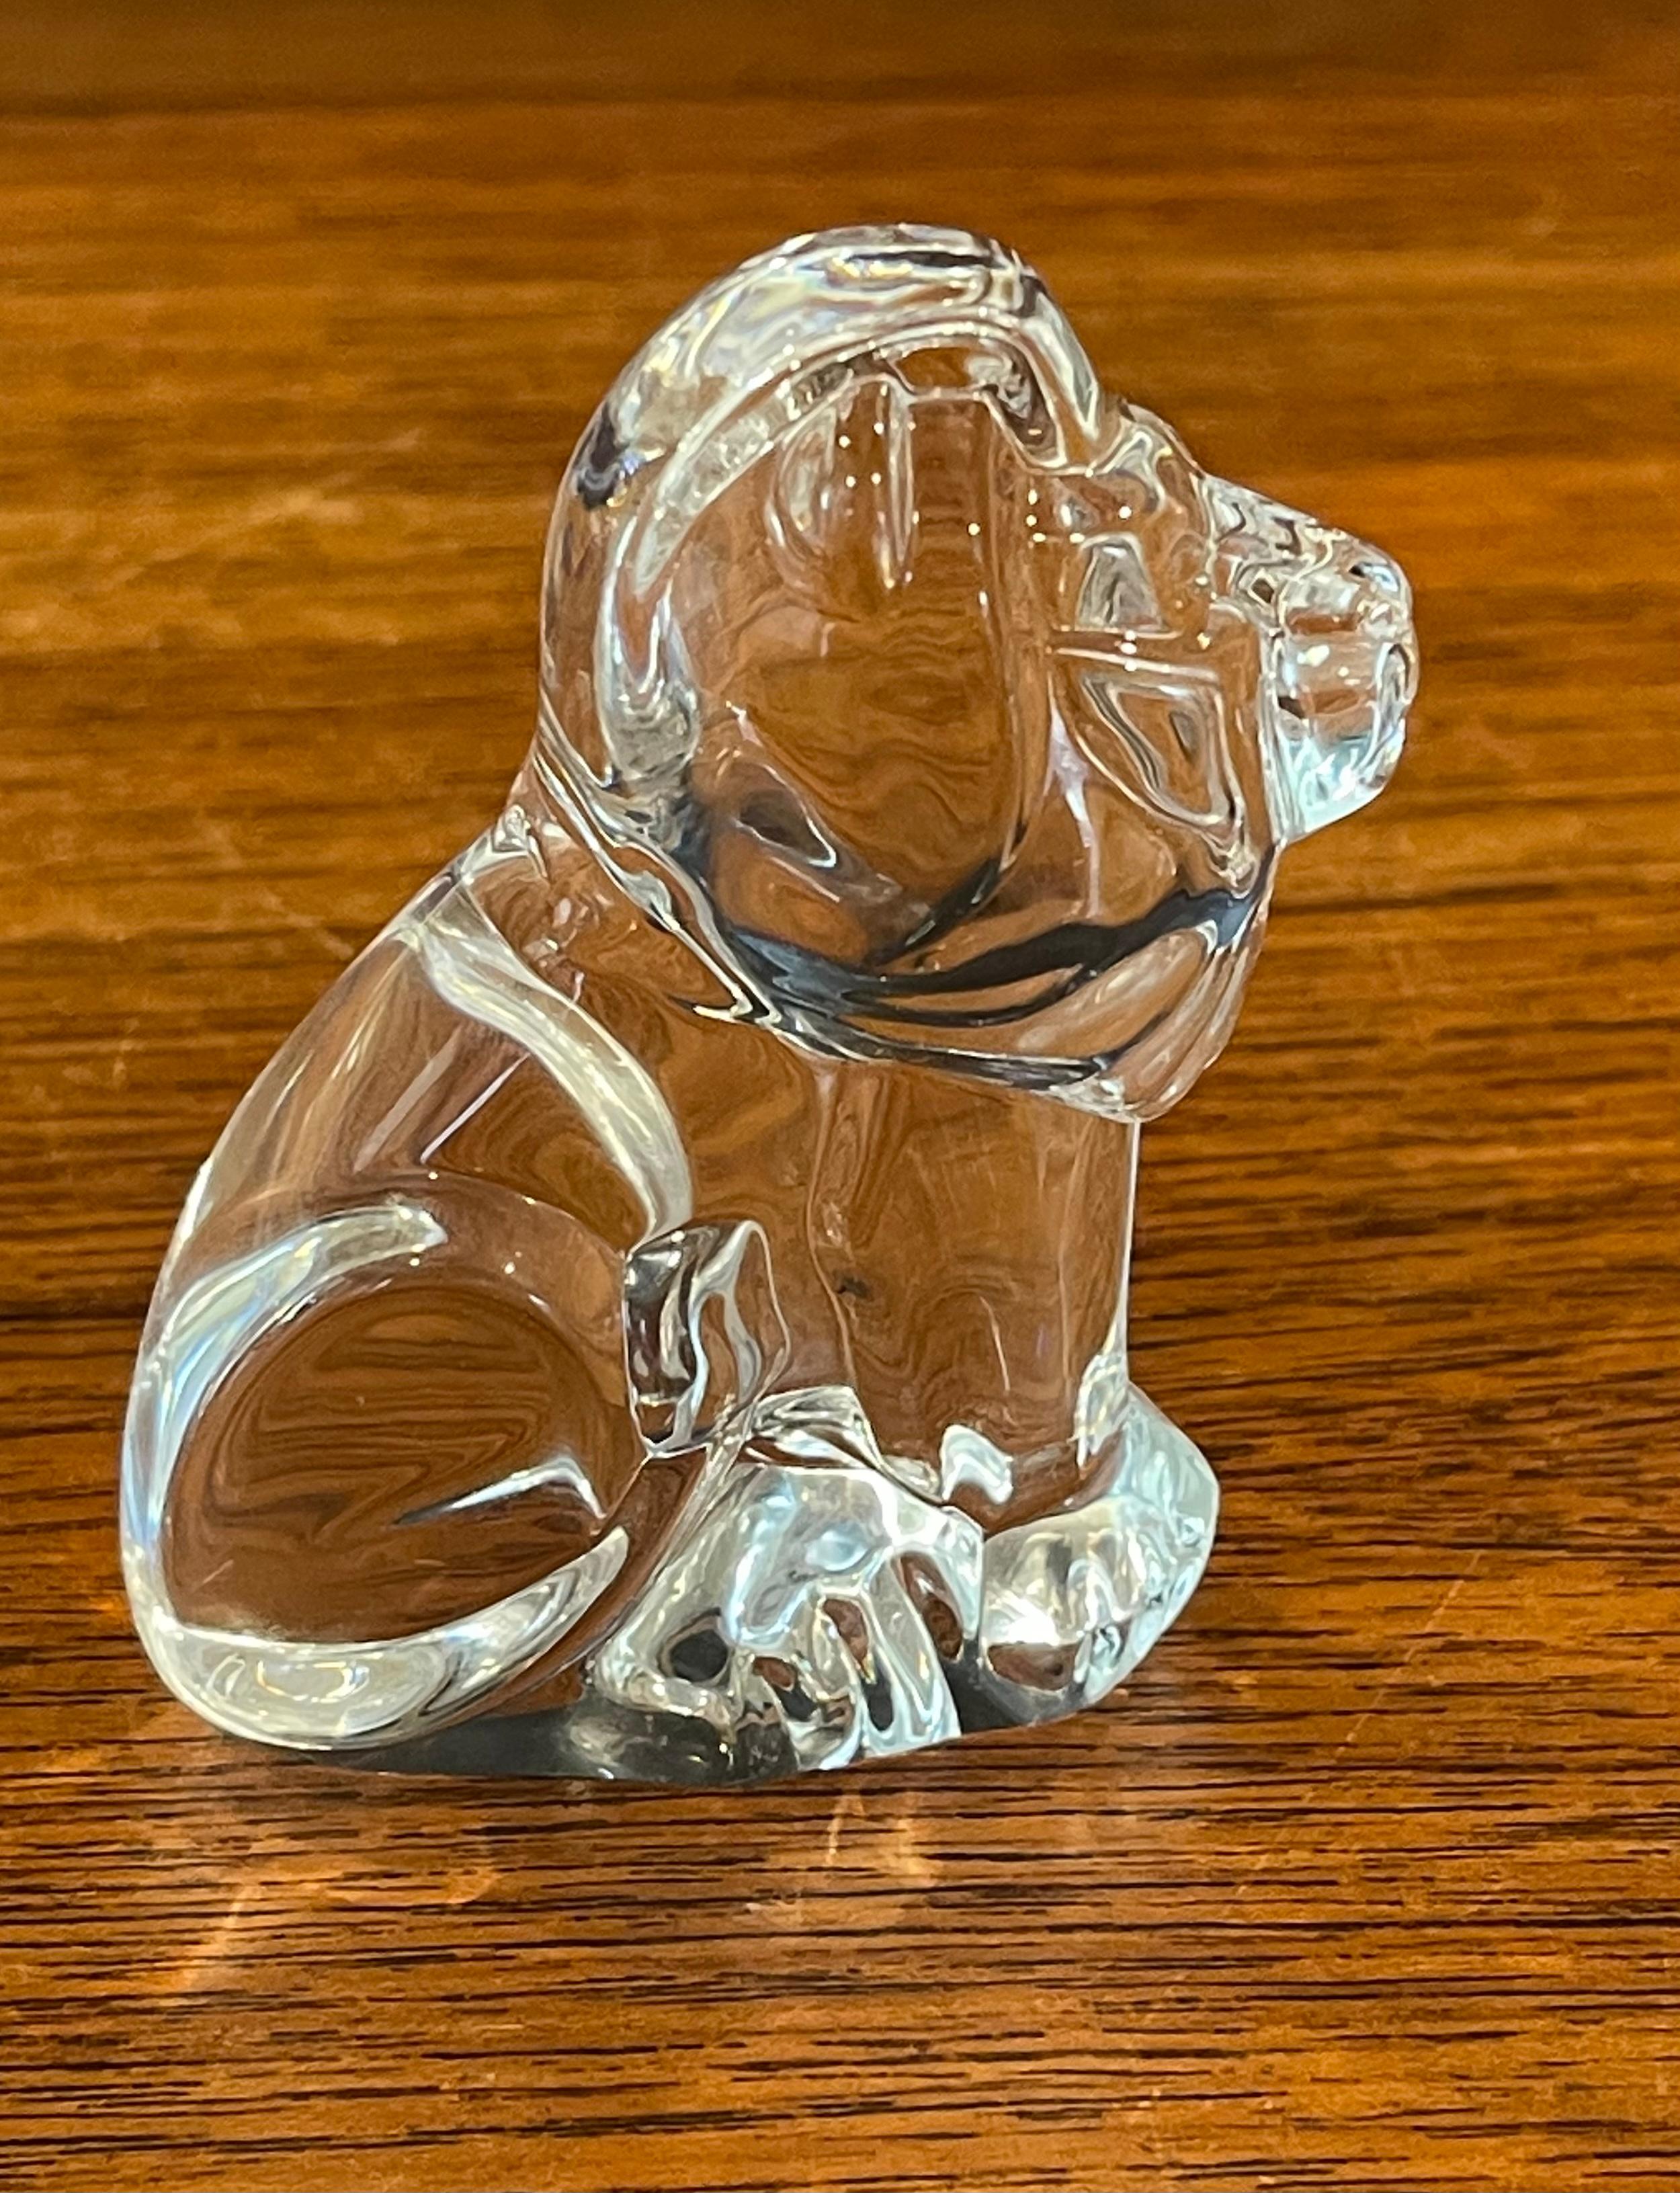 Lion Paperweight / Hand Cooler by Steuben Glassworks In Good Condition For Sale In San Diego, CA